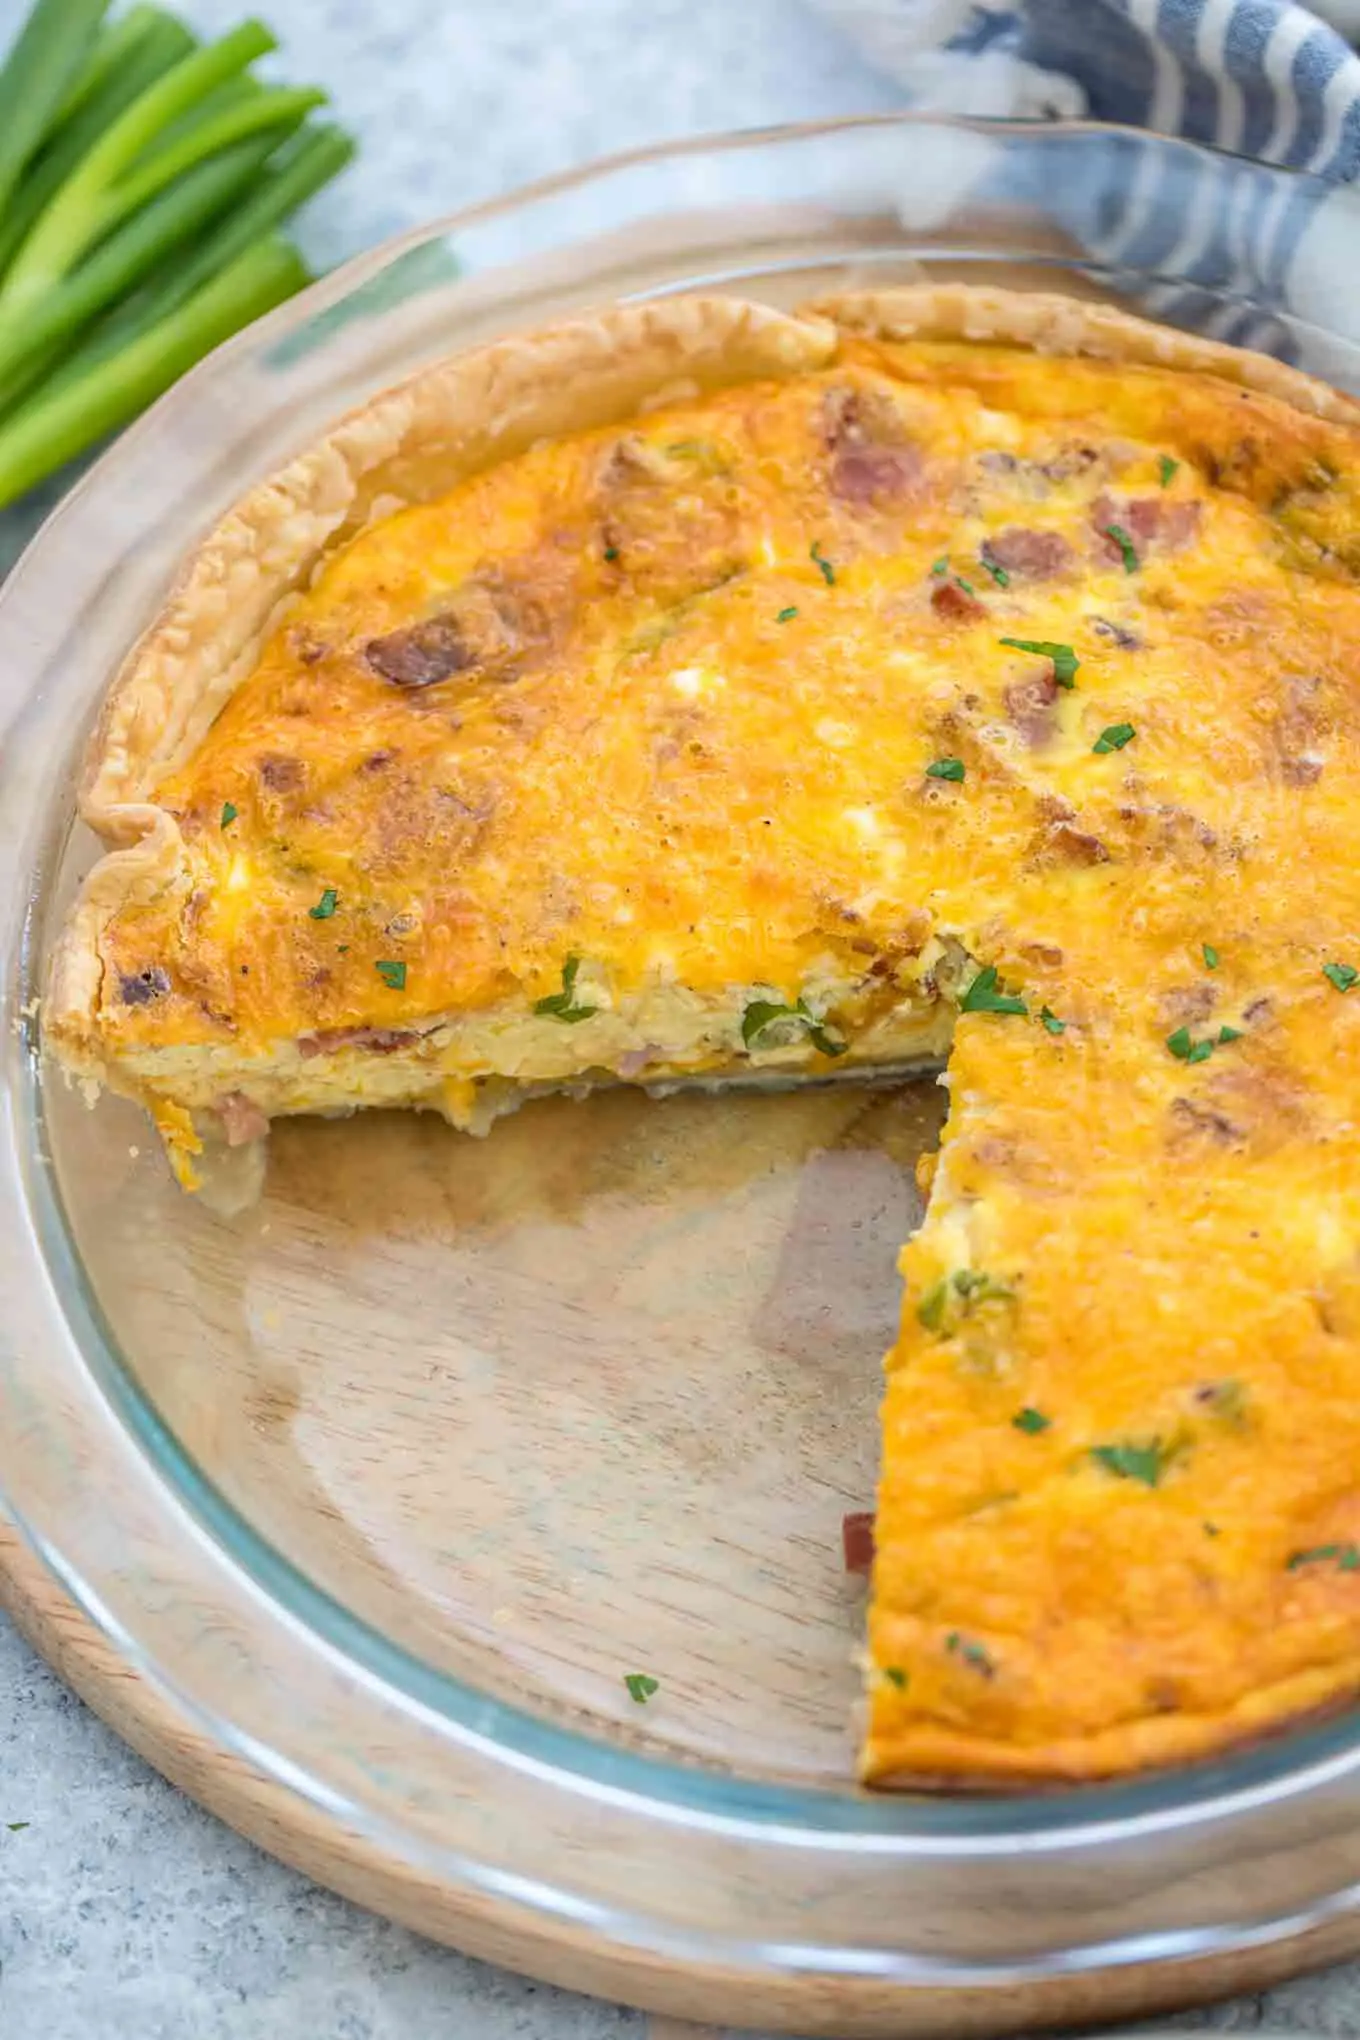 Ham and Cheese Quiche [VIDEO] - Sweet and Savory Meals